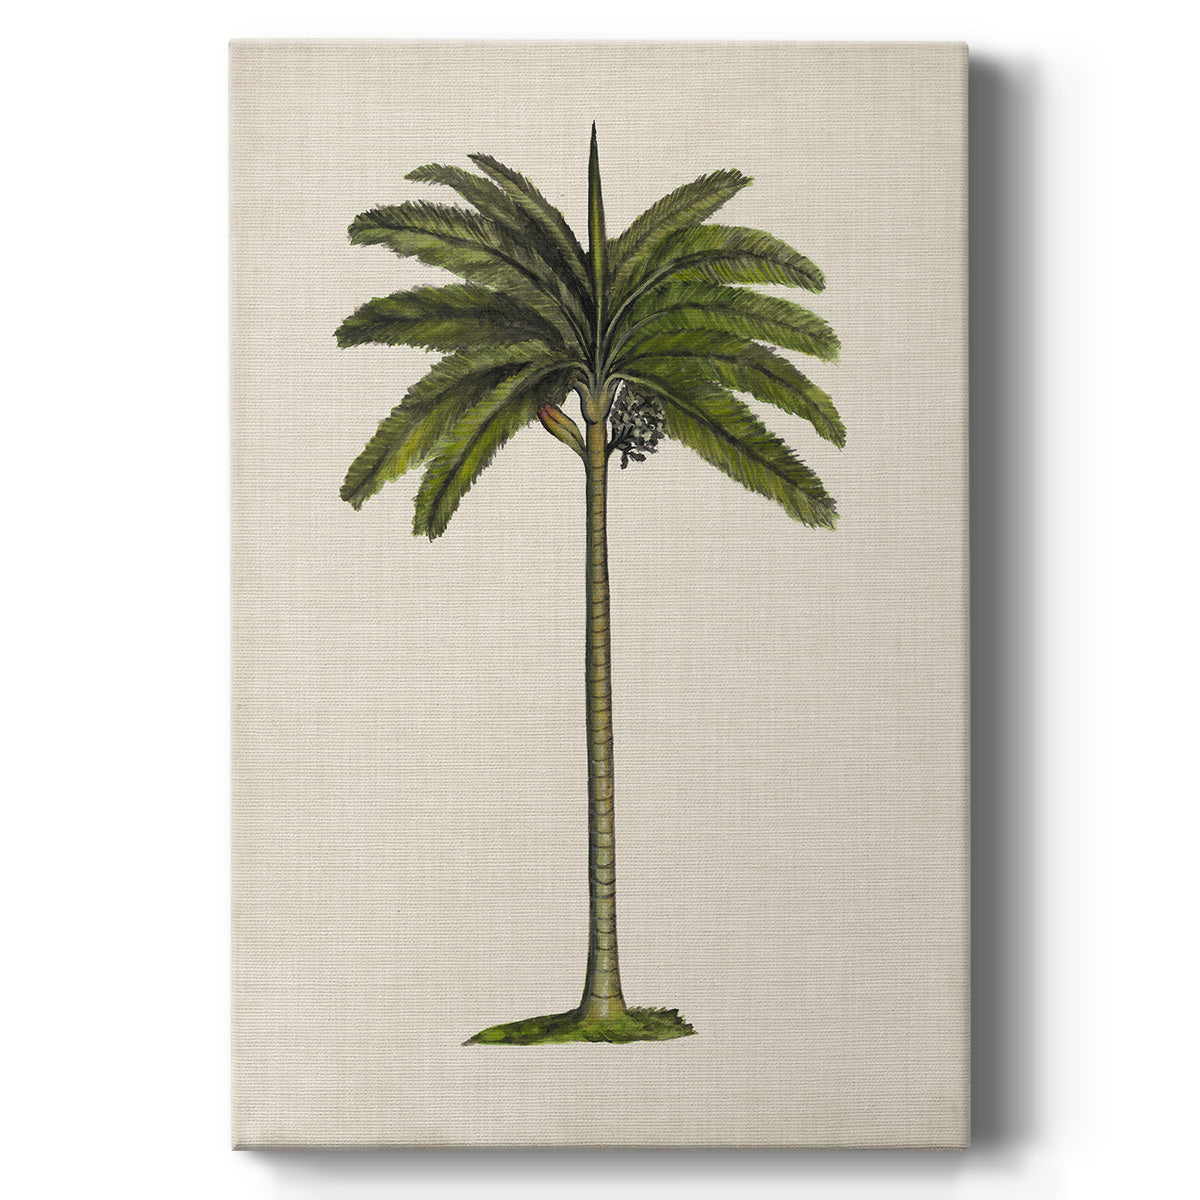 UA CH British Palms IV Premium Gallery Wrapped Canvas - Ready to Hang